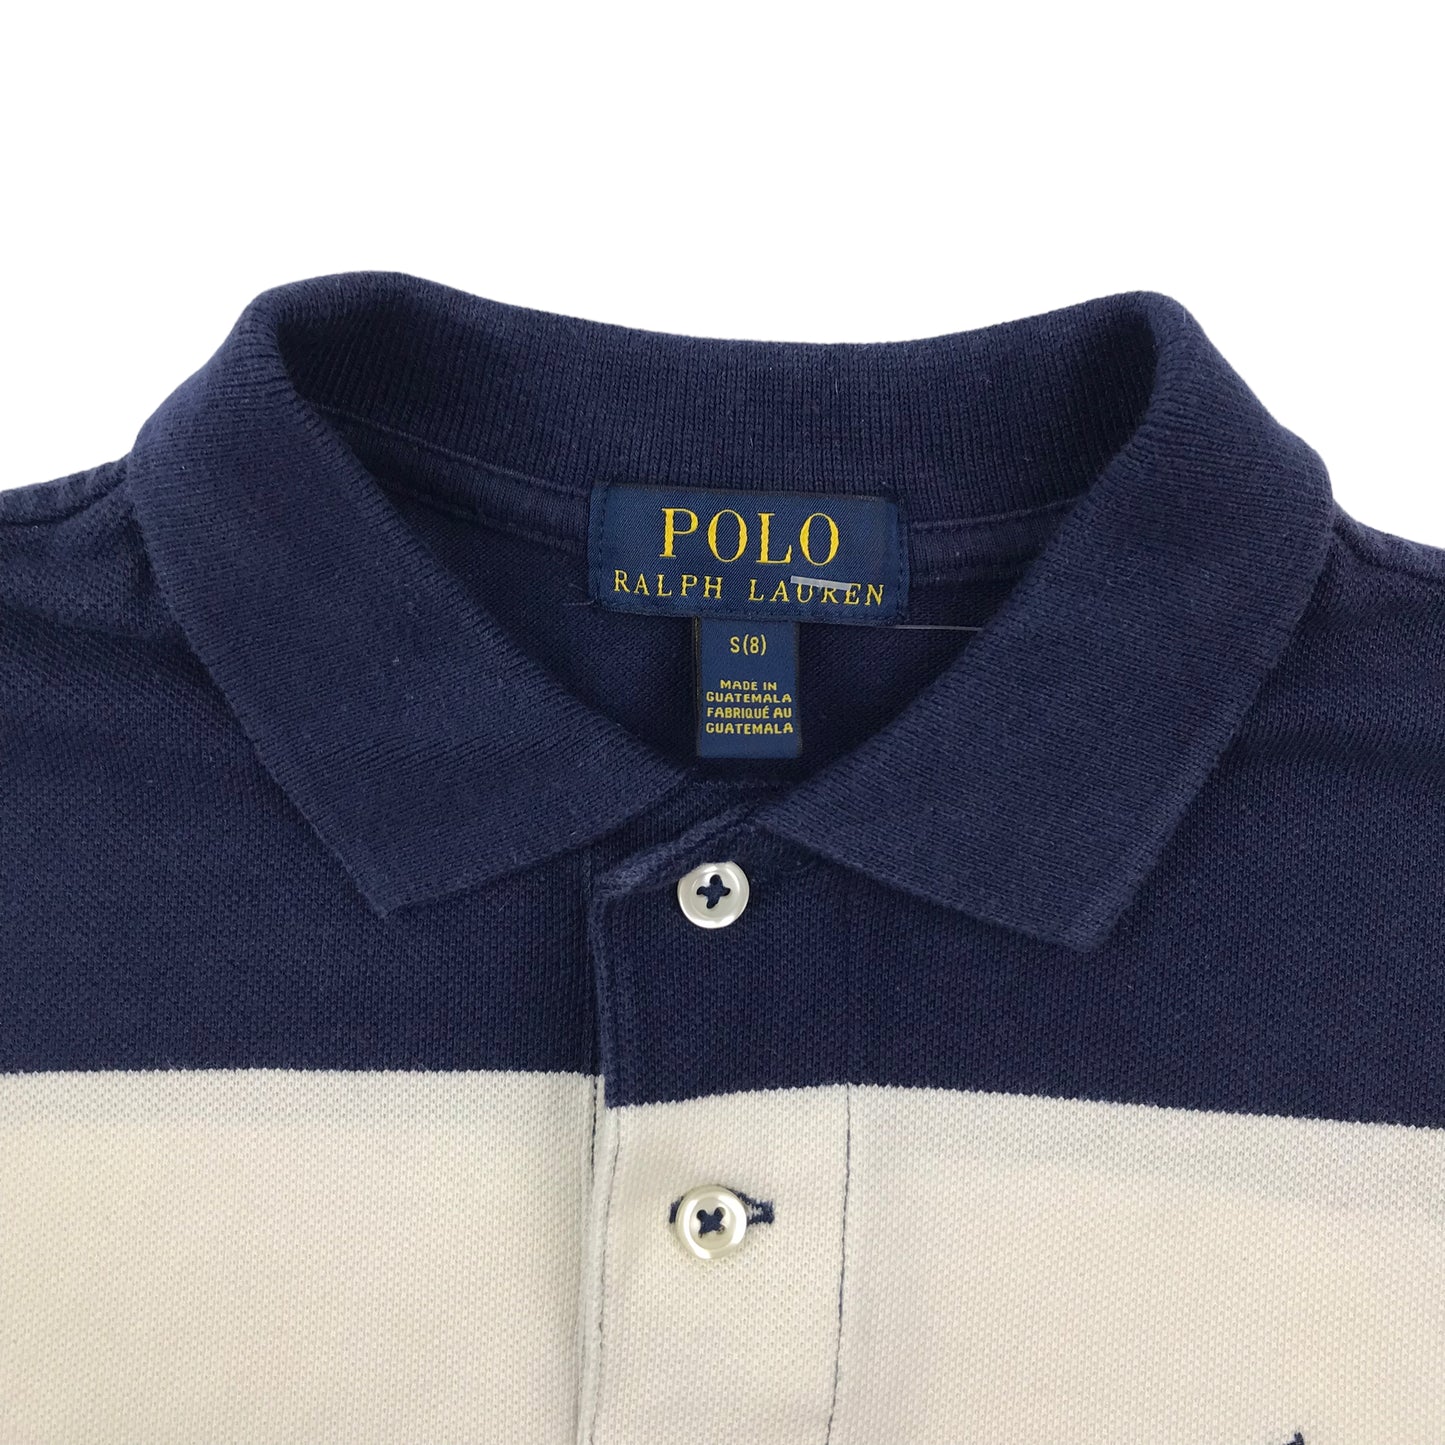 Ralph Lauren Yellow and Burgundy Panelled Polo Shirt Age 8